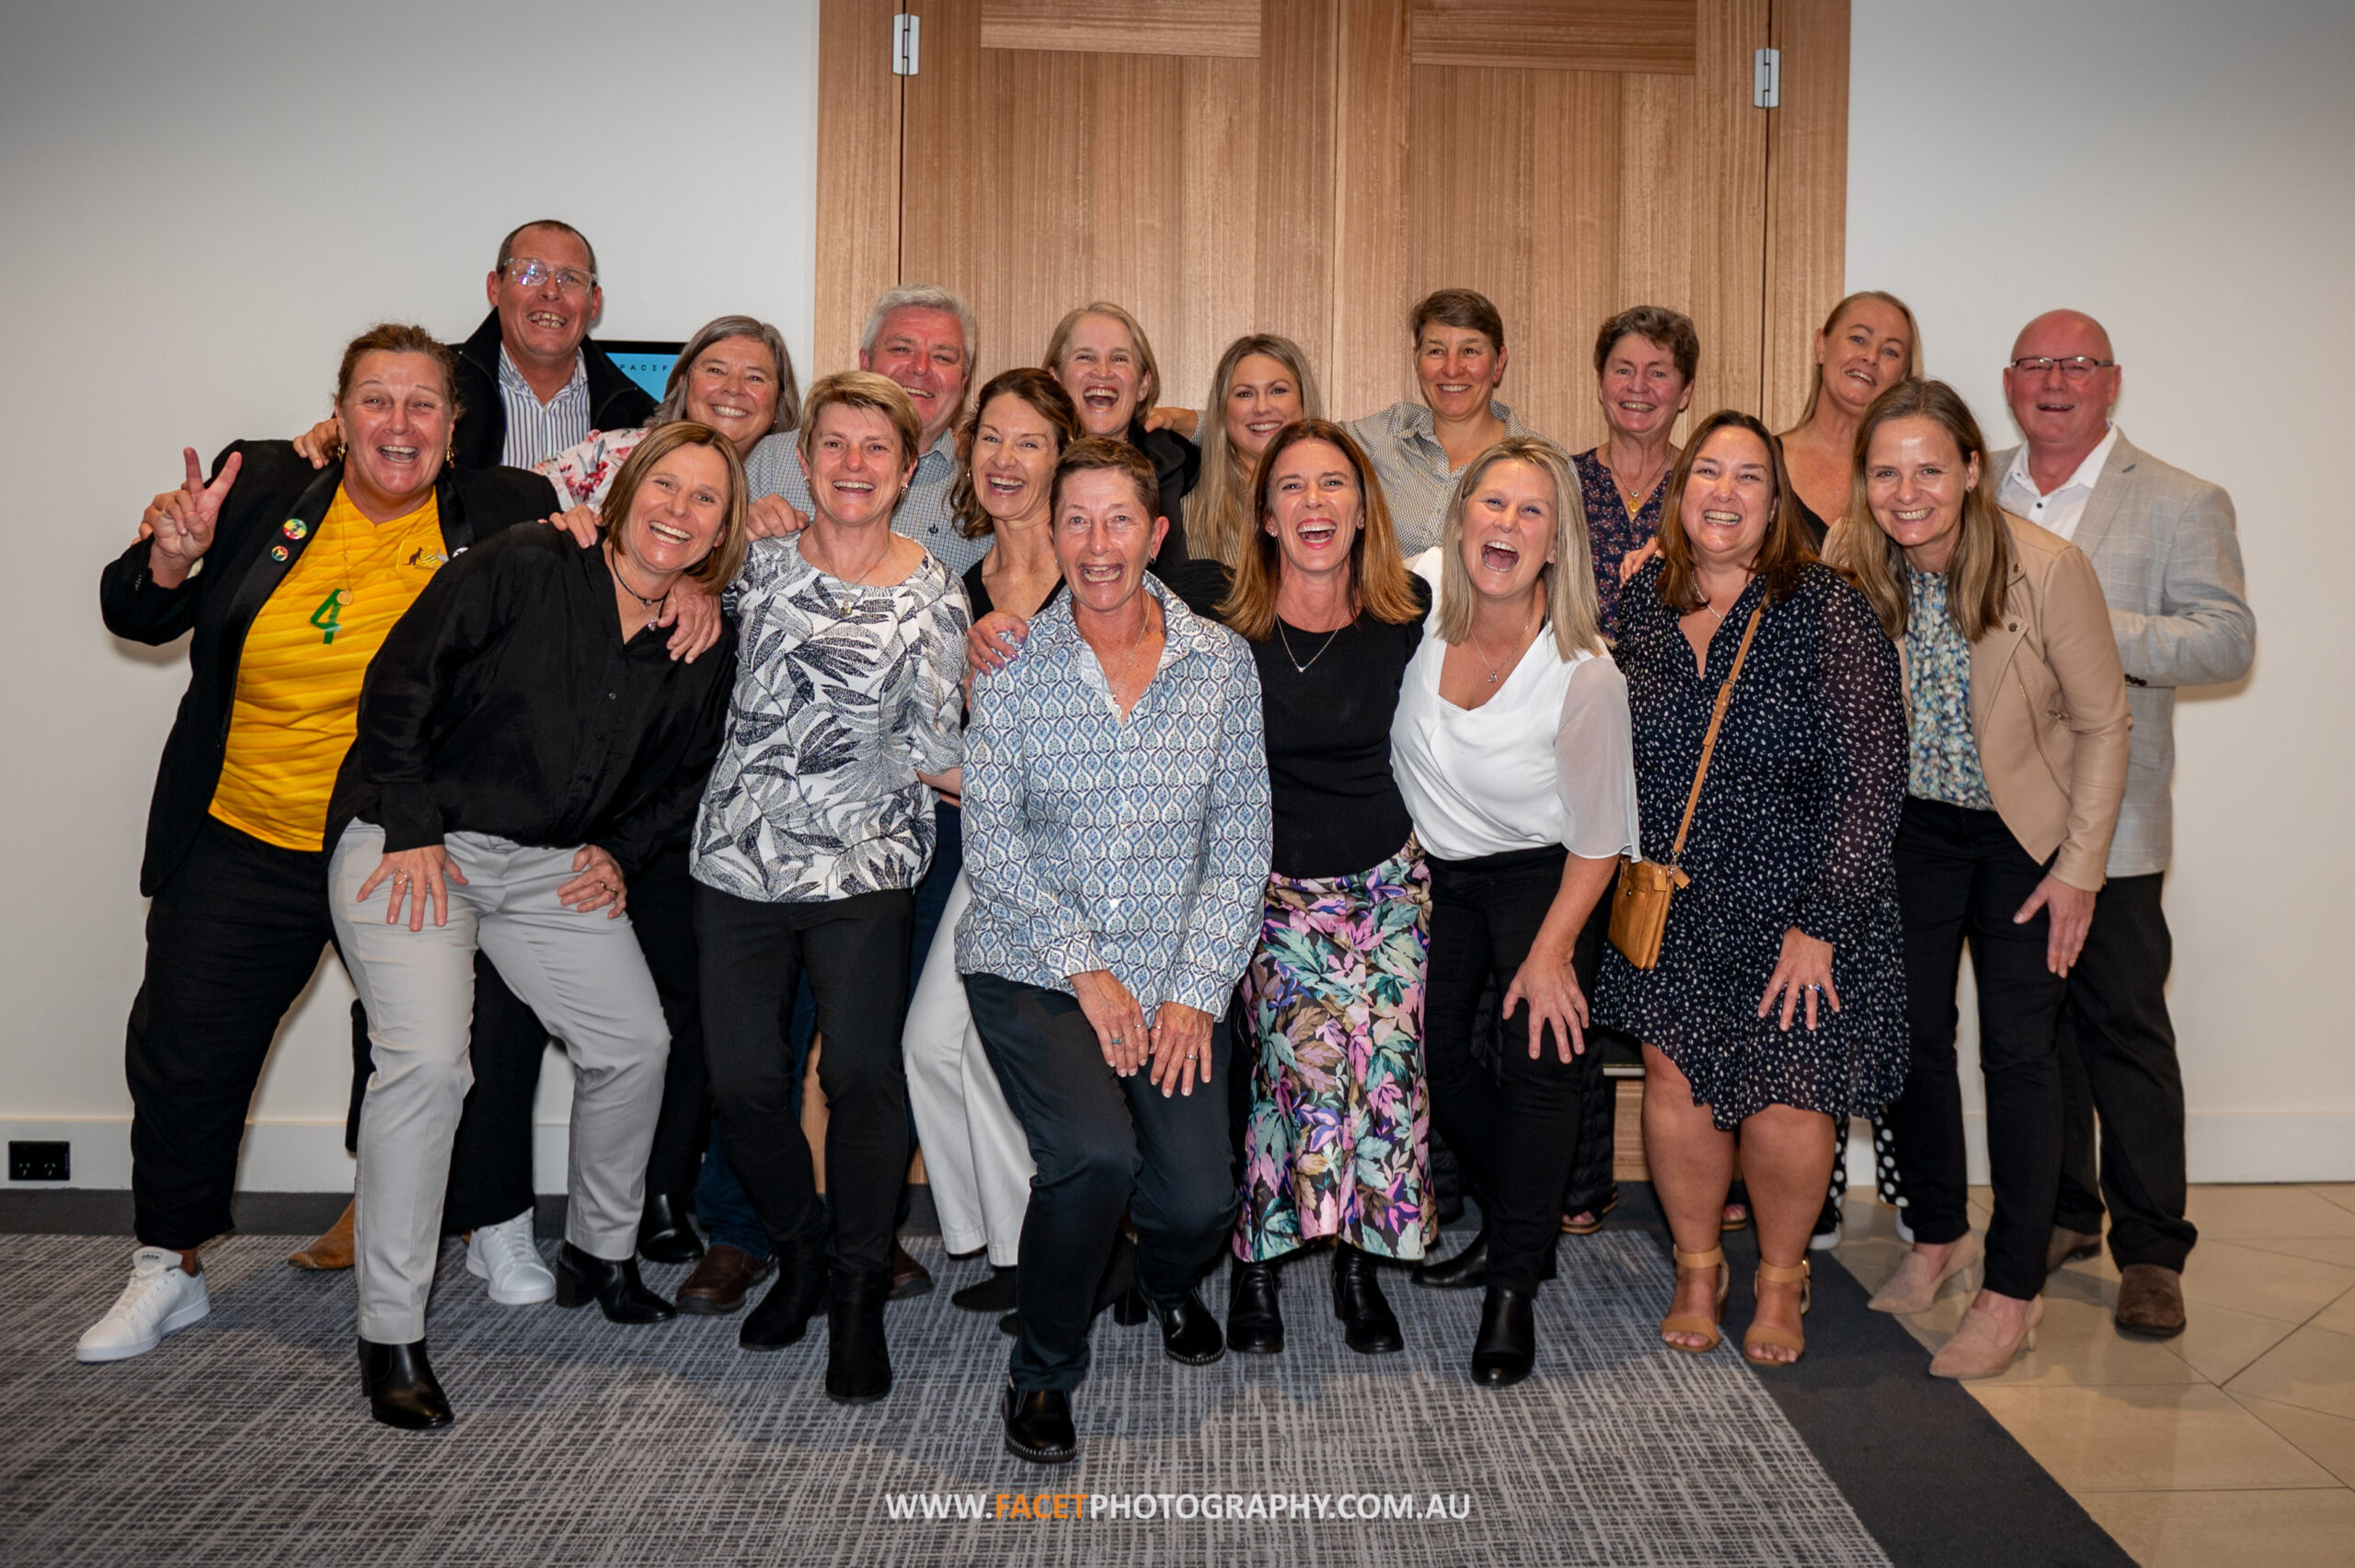 At the 2023 MWFA Presentation Night, there was a special presentation to members of the legendary Seasiders Women’s team, who won 11 MWFA Championships, 6 All Age Women’s Champion of Champion titles and 3 All Age Women’s State Cups. Photo credit: Jeremy Denham